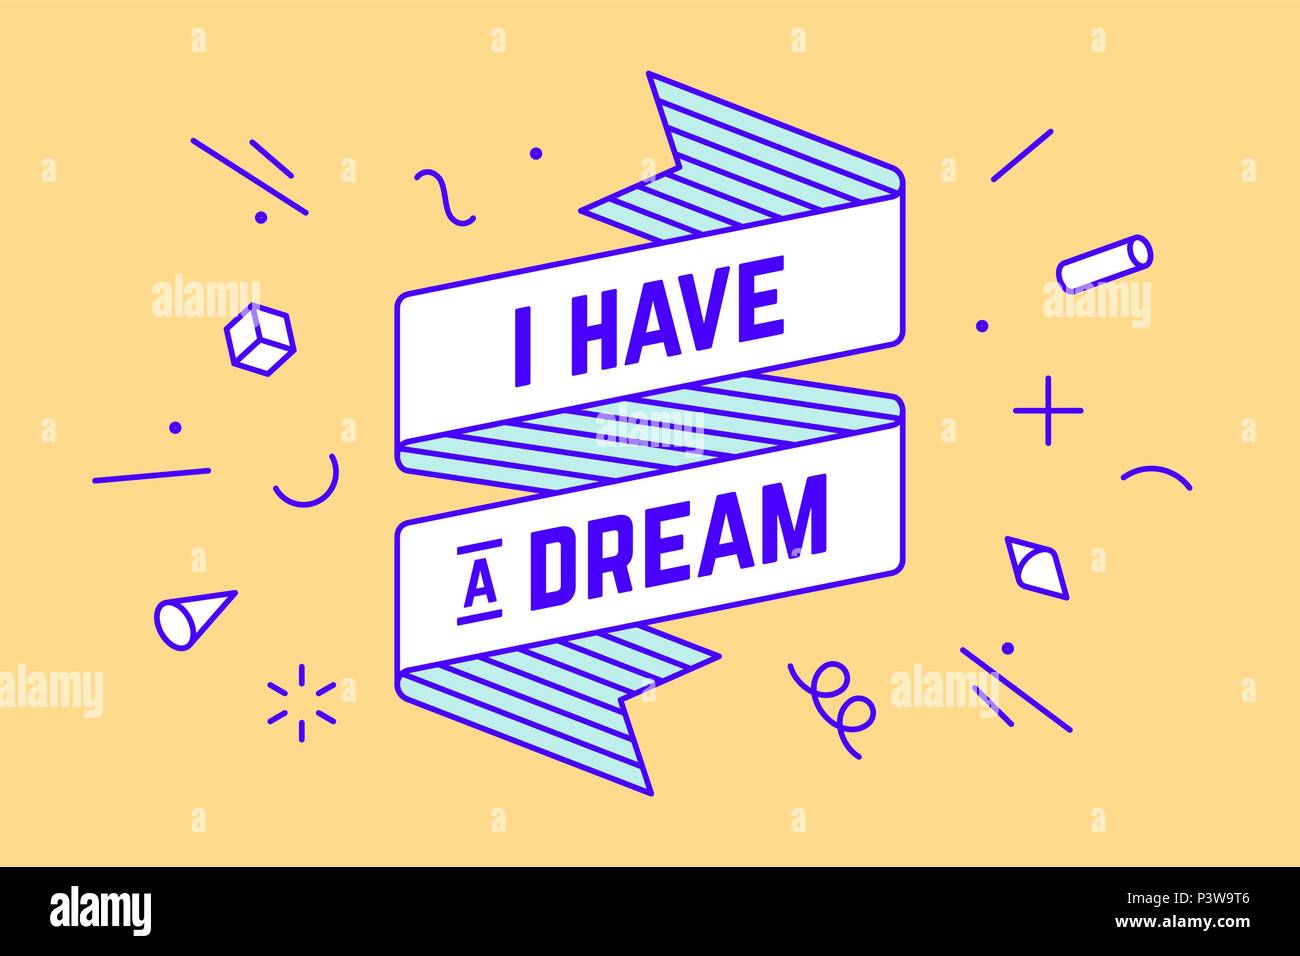 I Have a Dream. Vintage ribbon banner Stock Vector